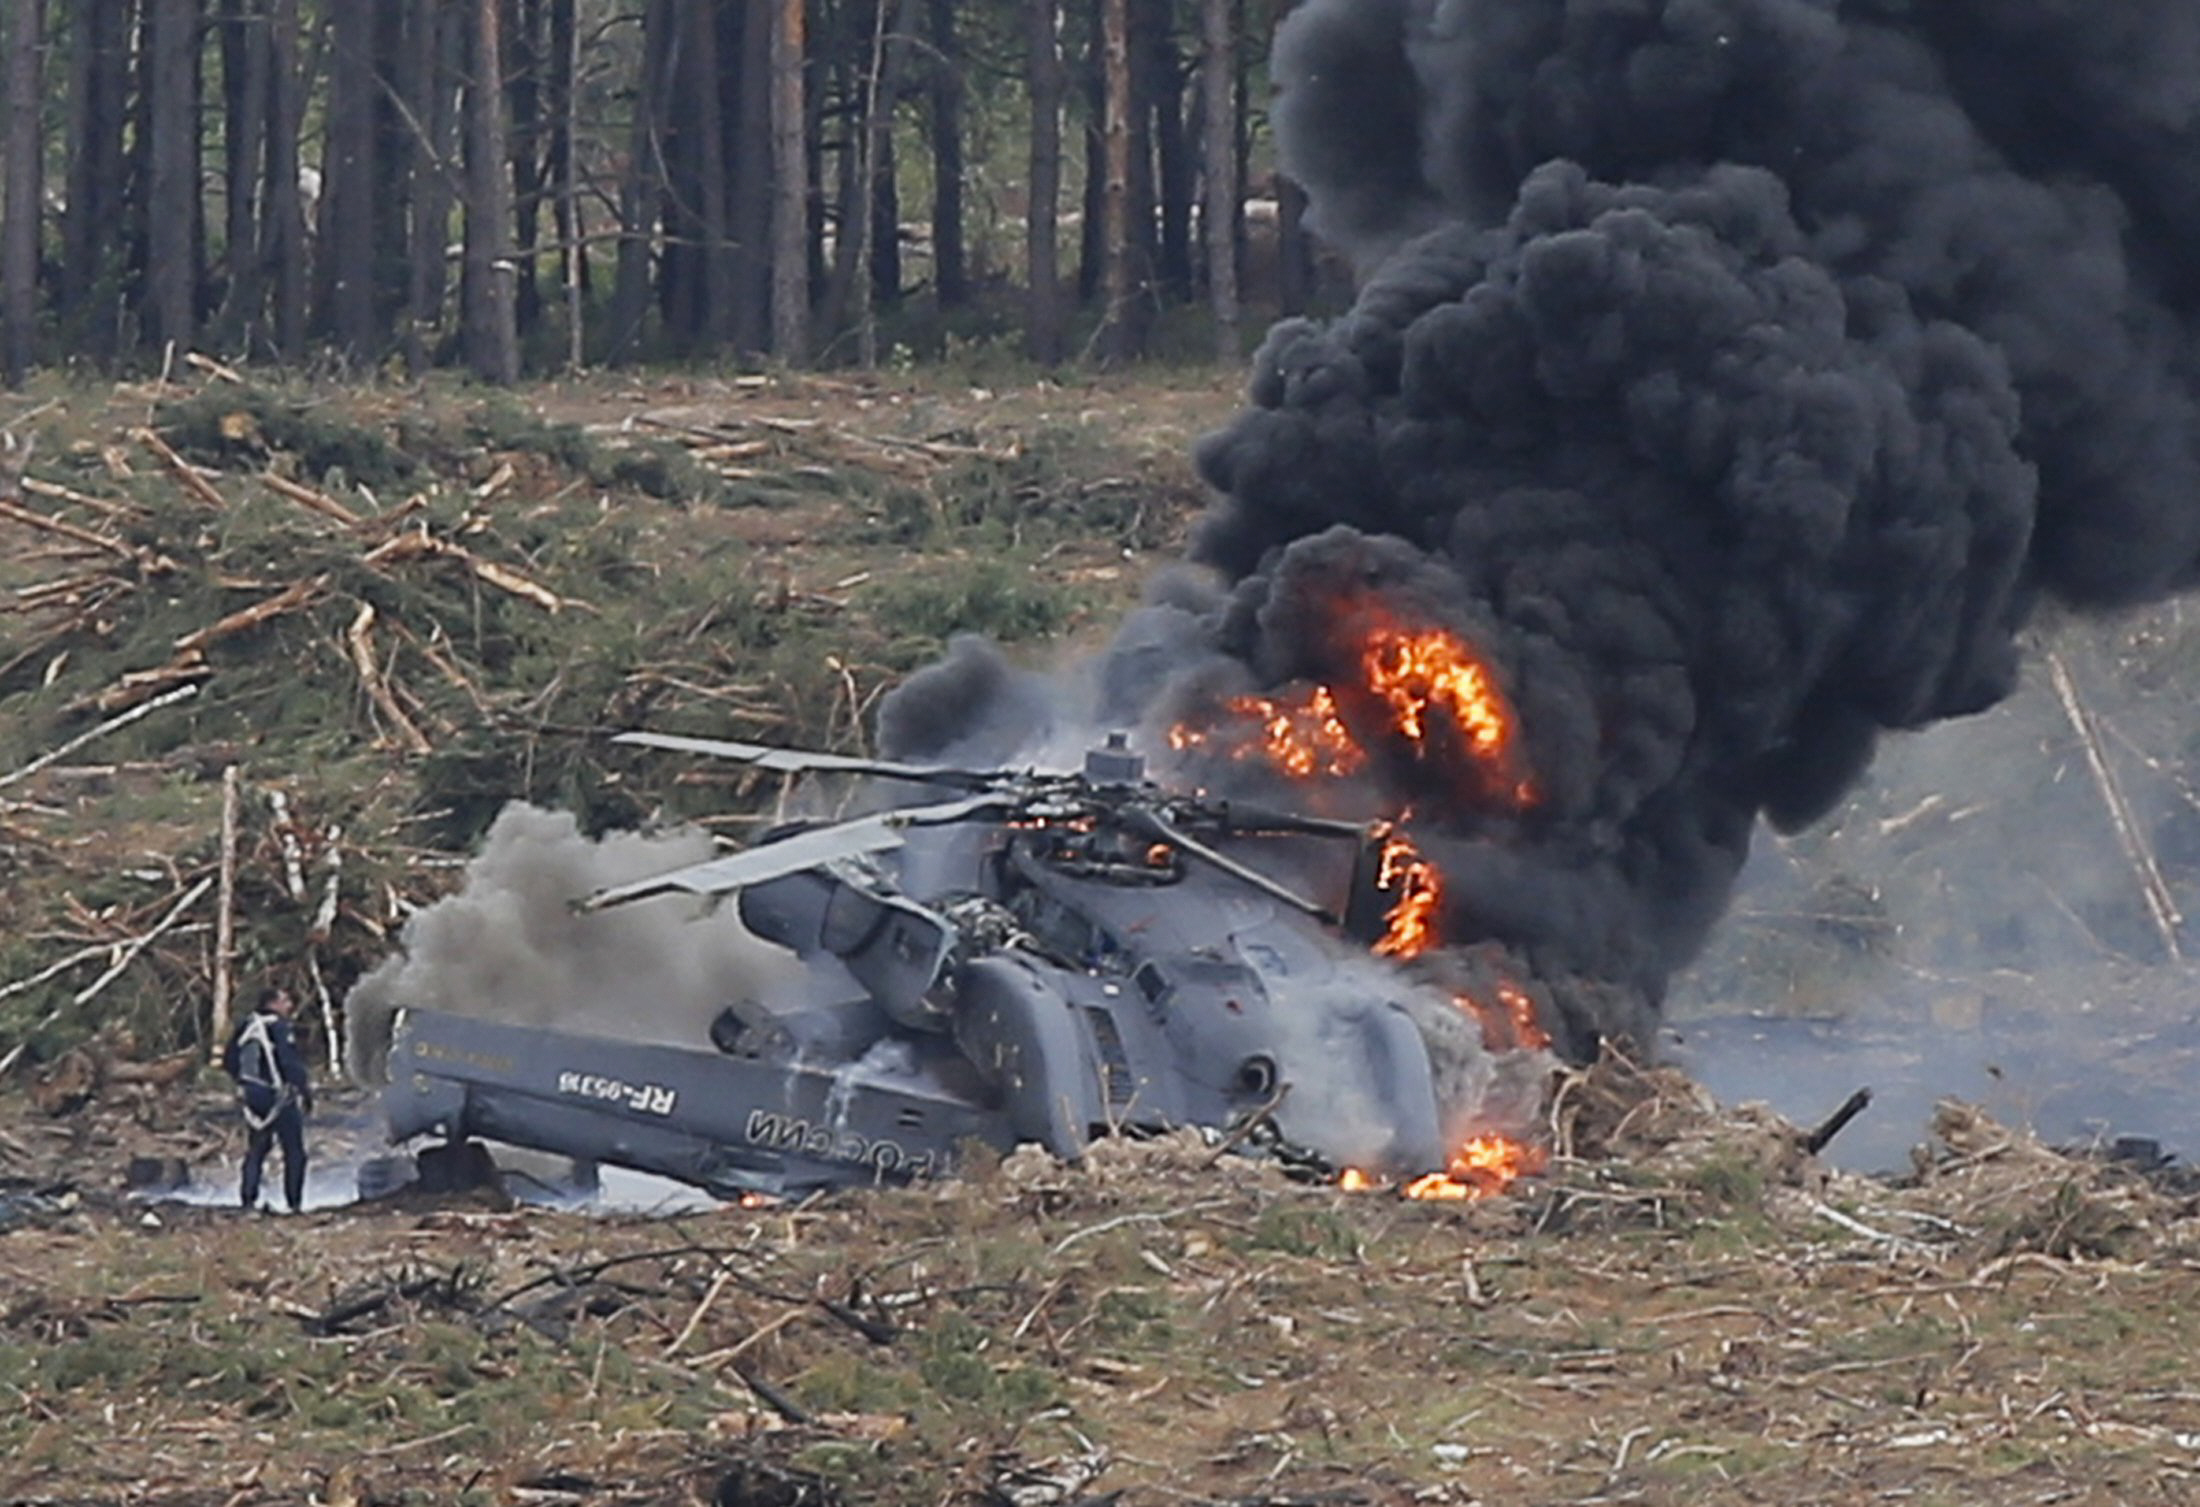 a file photo of a helicopter crash photo reuters